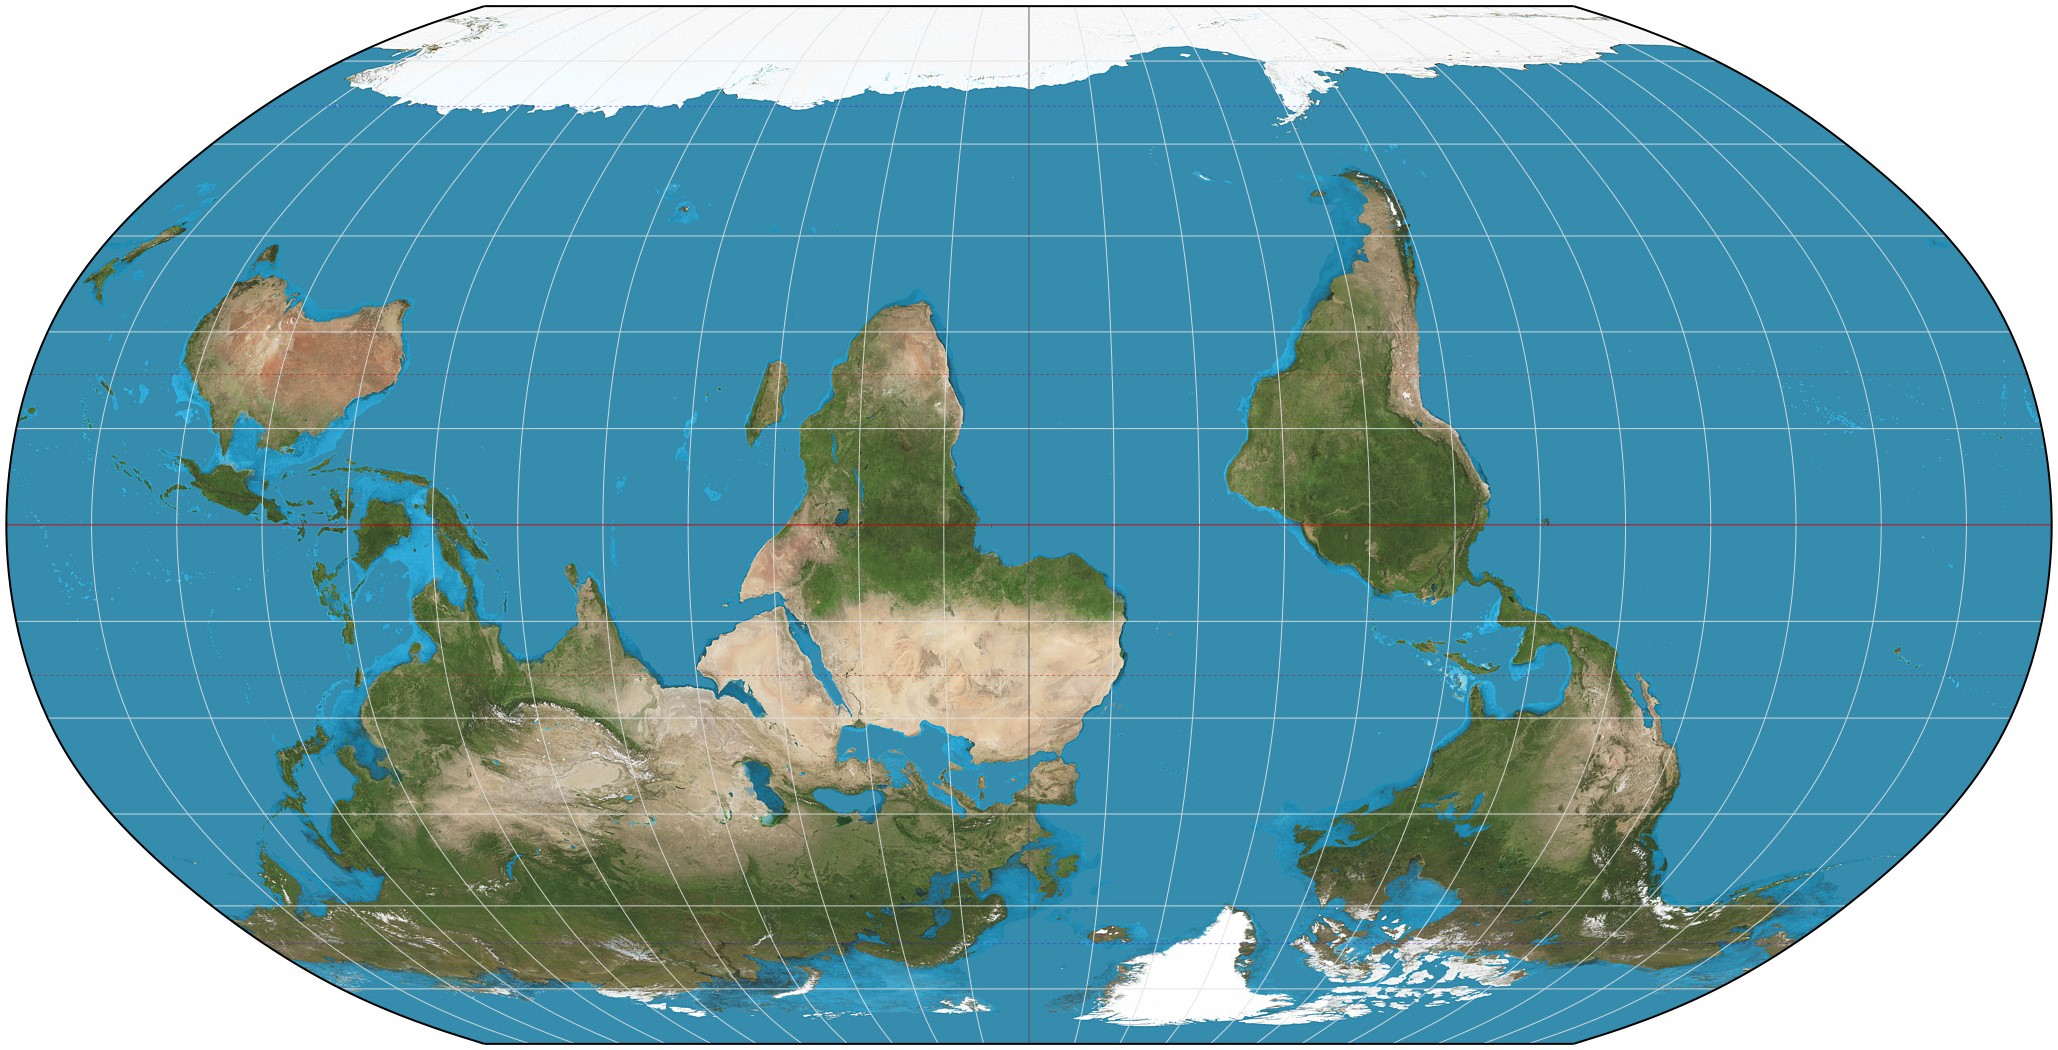 upside-down map of the world using the Robinson projection